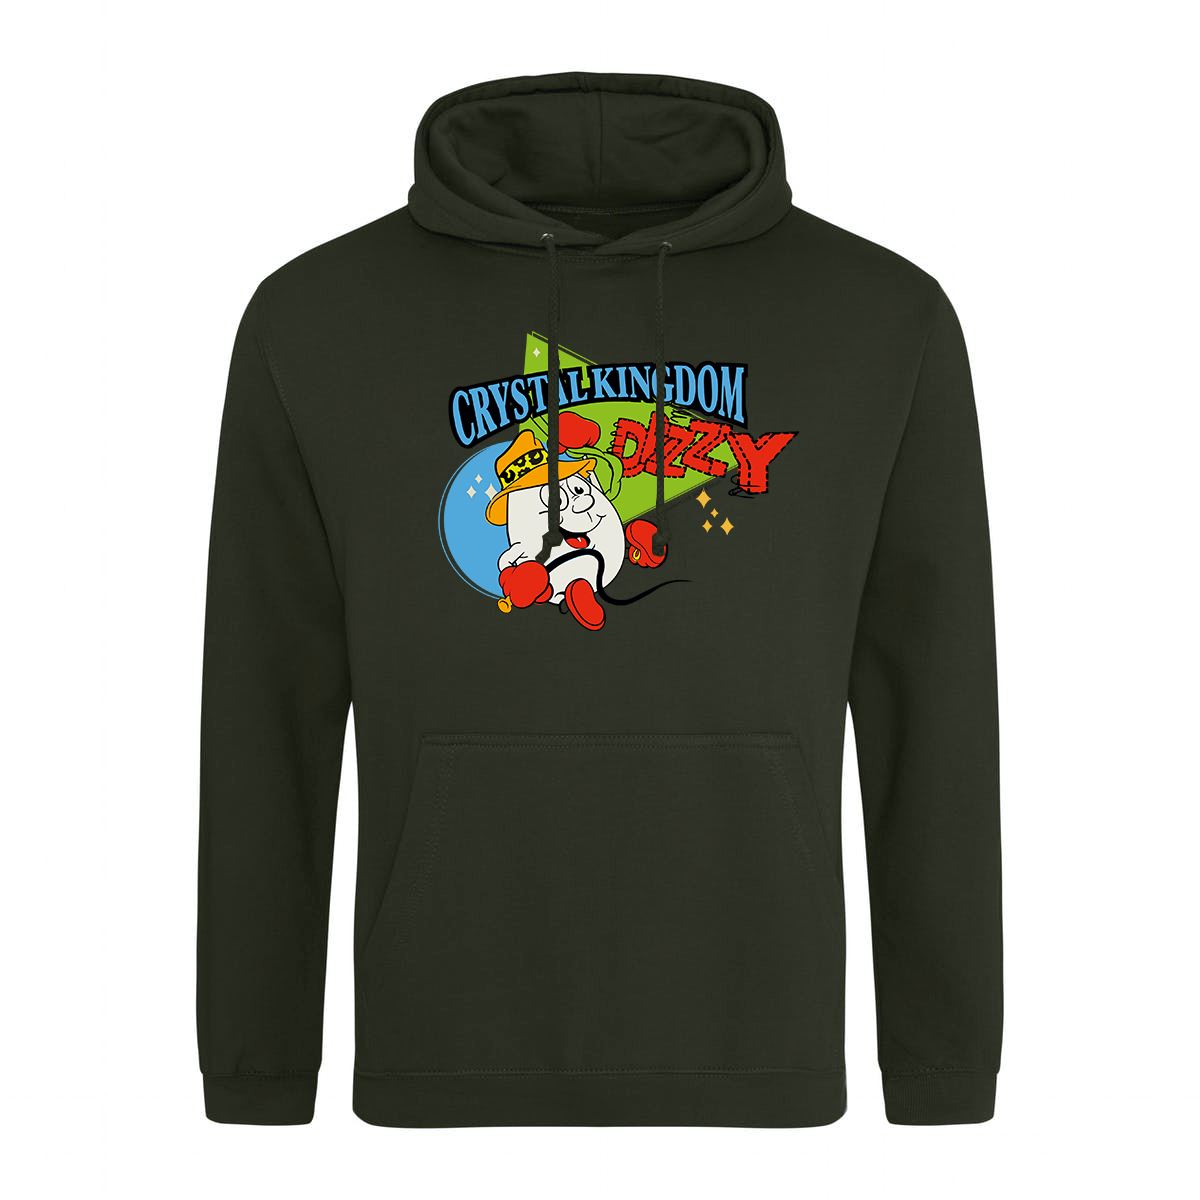 Dizzy Crystal Kingdom (SIOW Edition) Retro Gaming Hoodie Hoodie Seven Squared Small 36" Chest Combat Green 